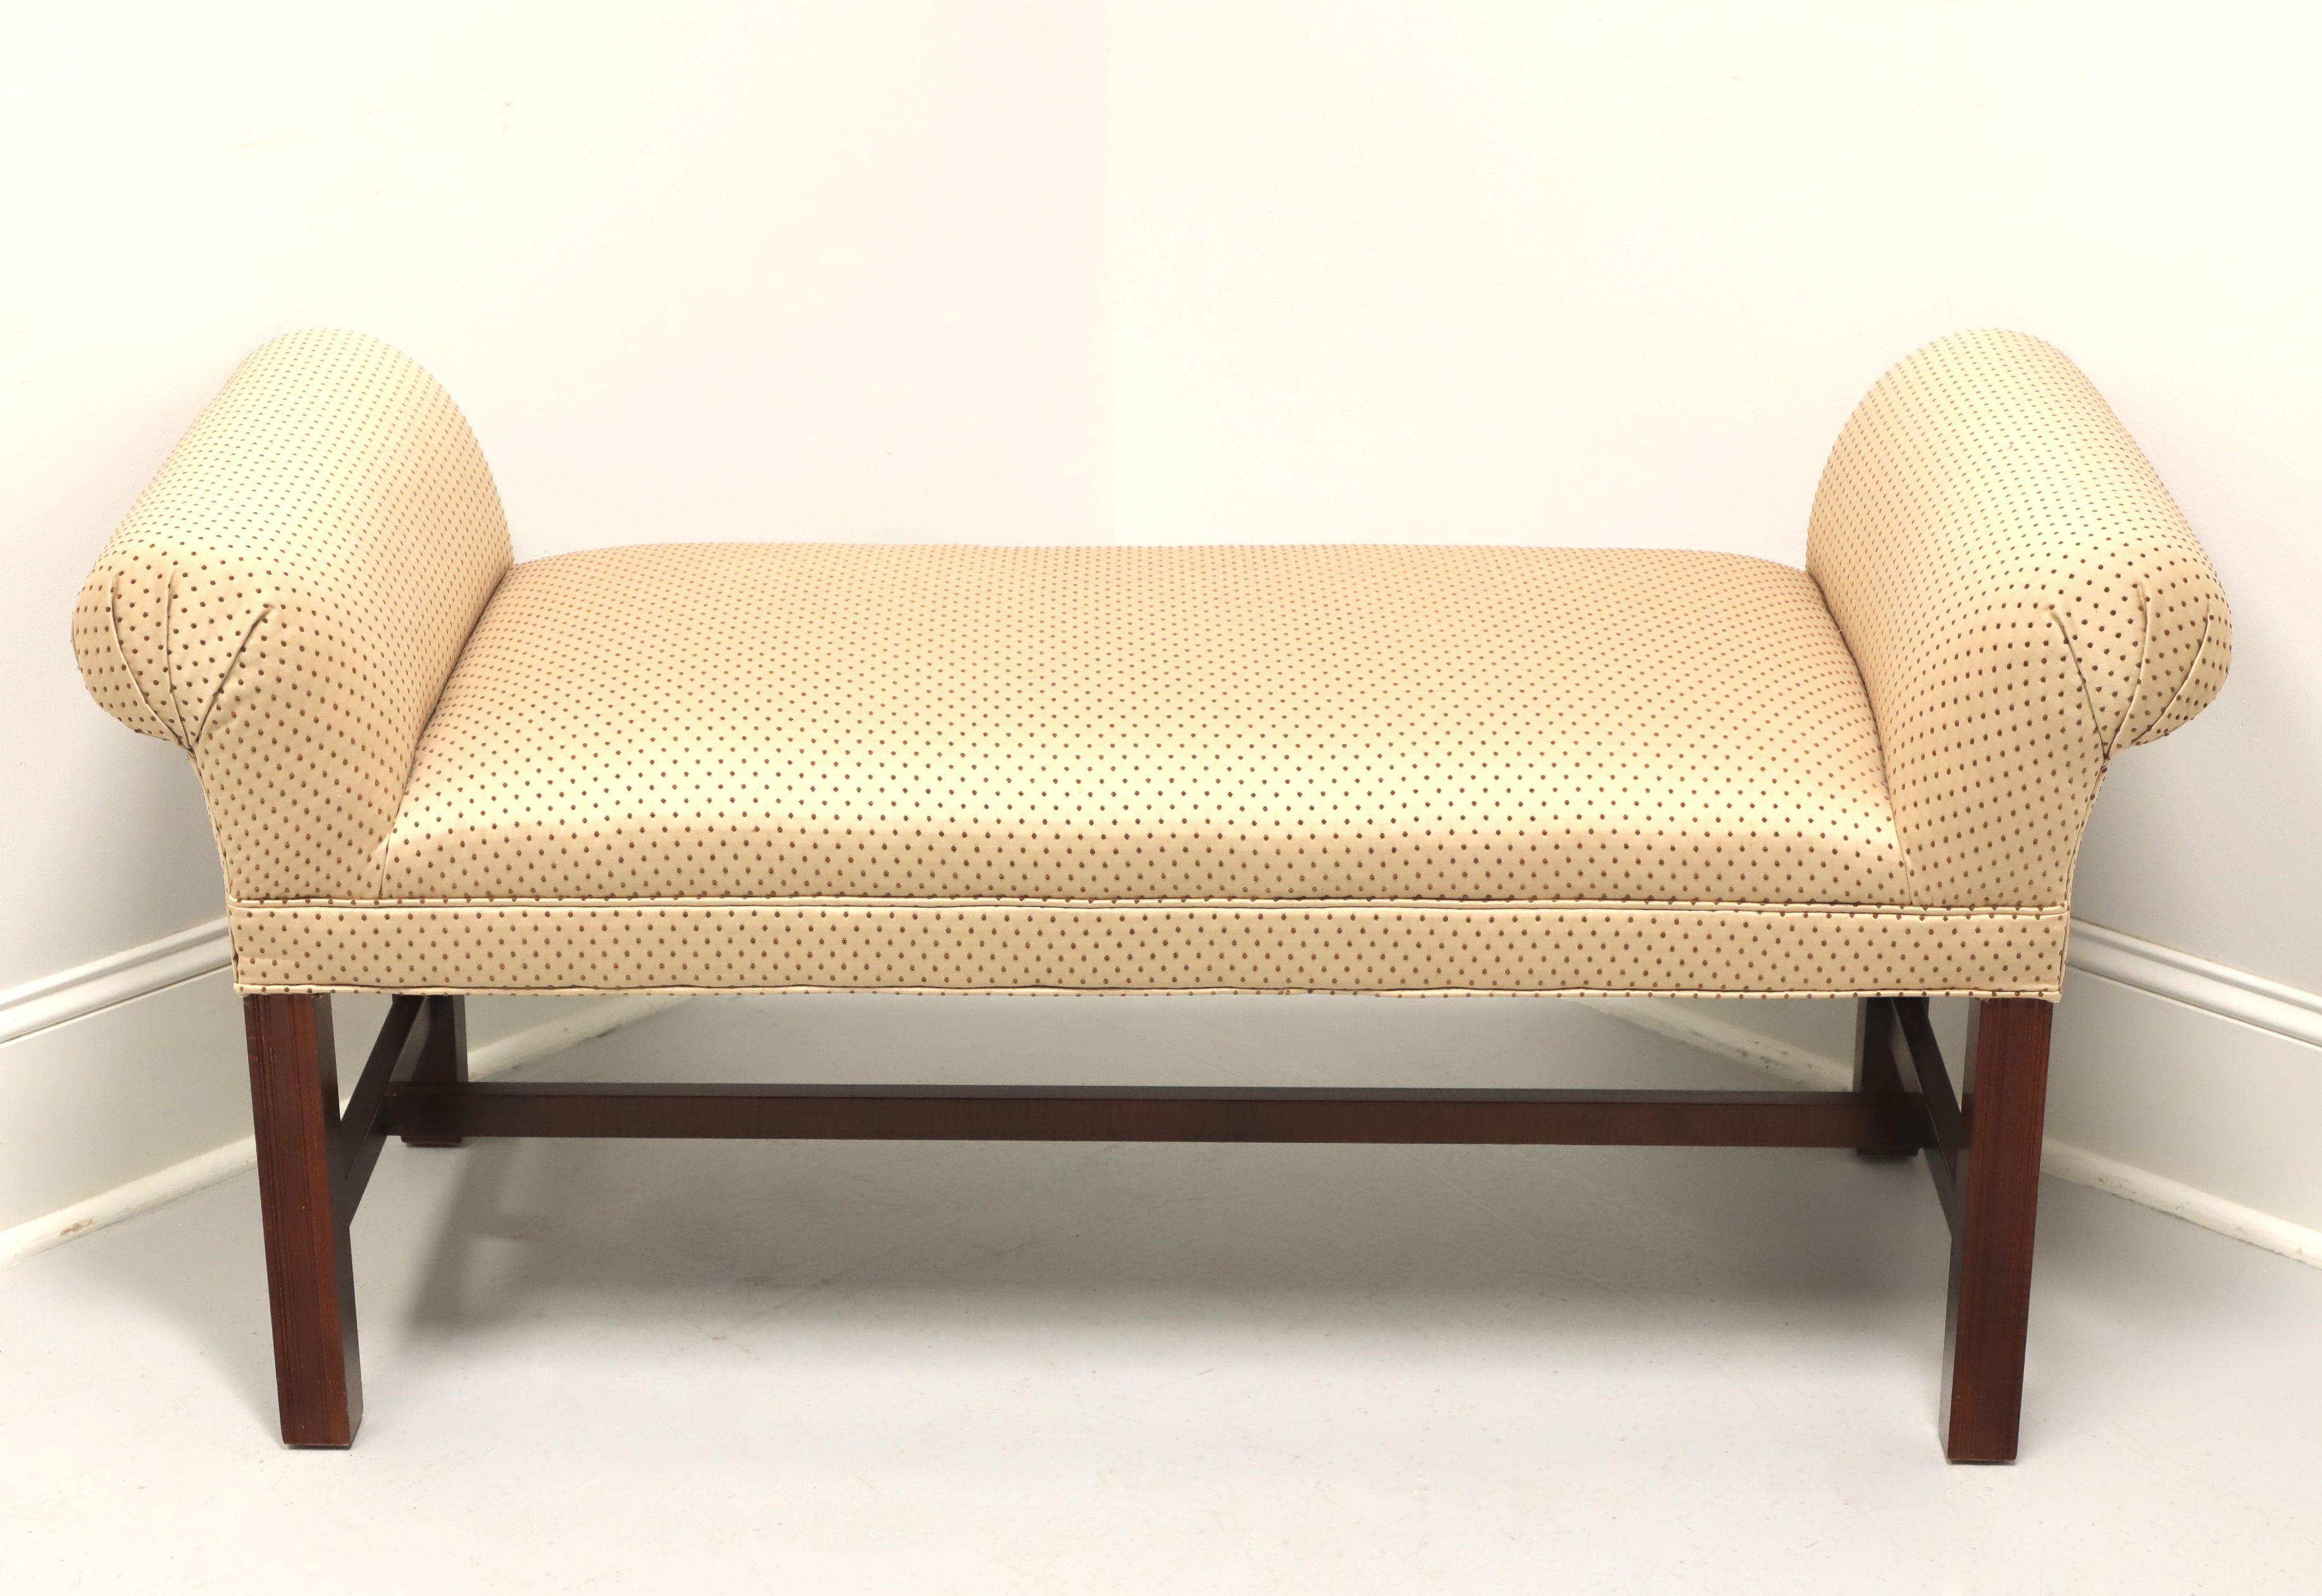 A scroll arm upholstered bench in the Chippendale style, unbranded. Mahogany frame, scroll arms, gold with burgundy dots colored fabric upholstery and straight legs with stretchers. Made in the USA, in the late 20th Century and re-upholstered in the